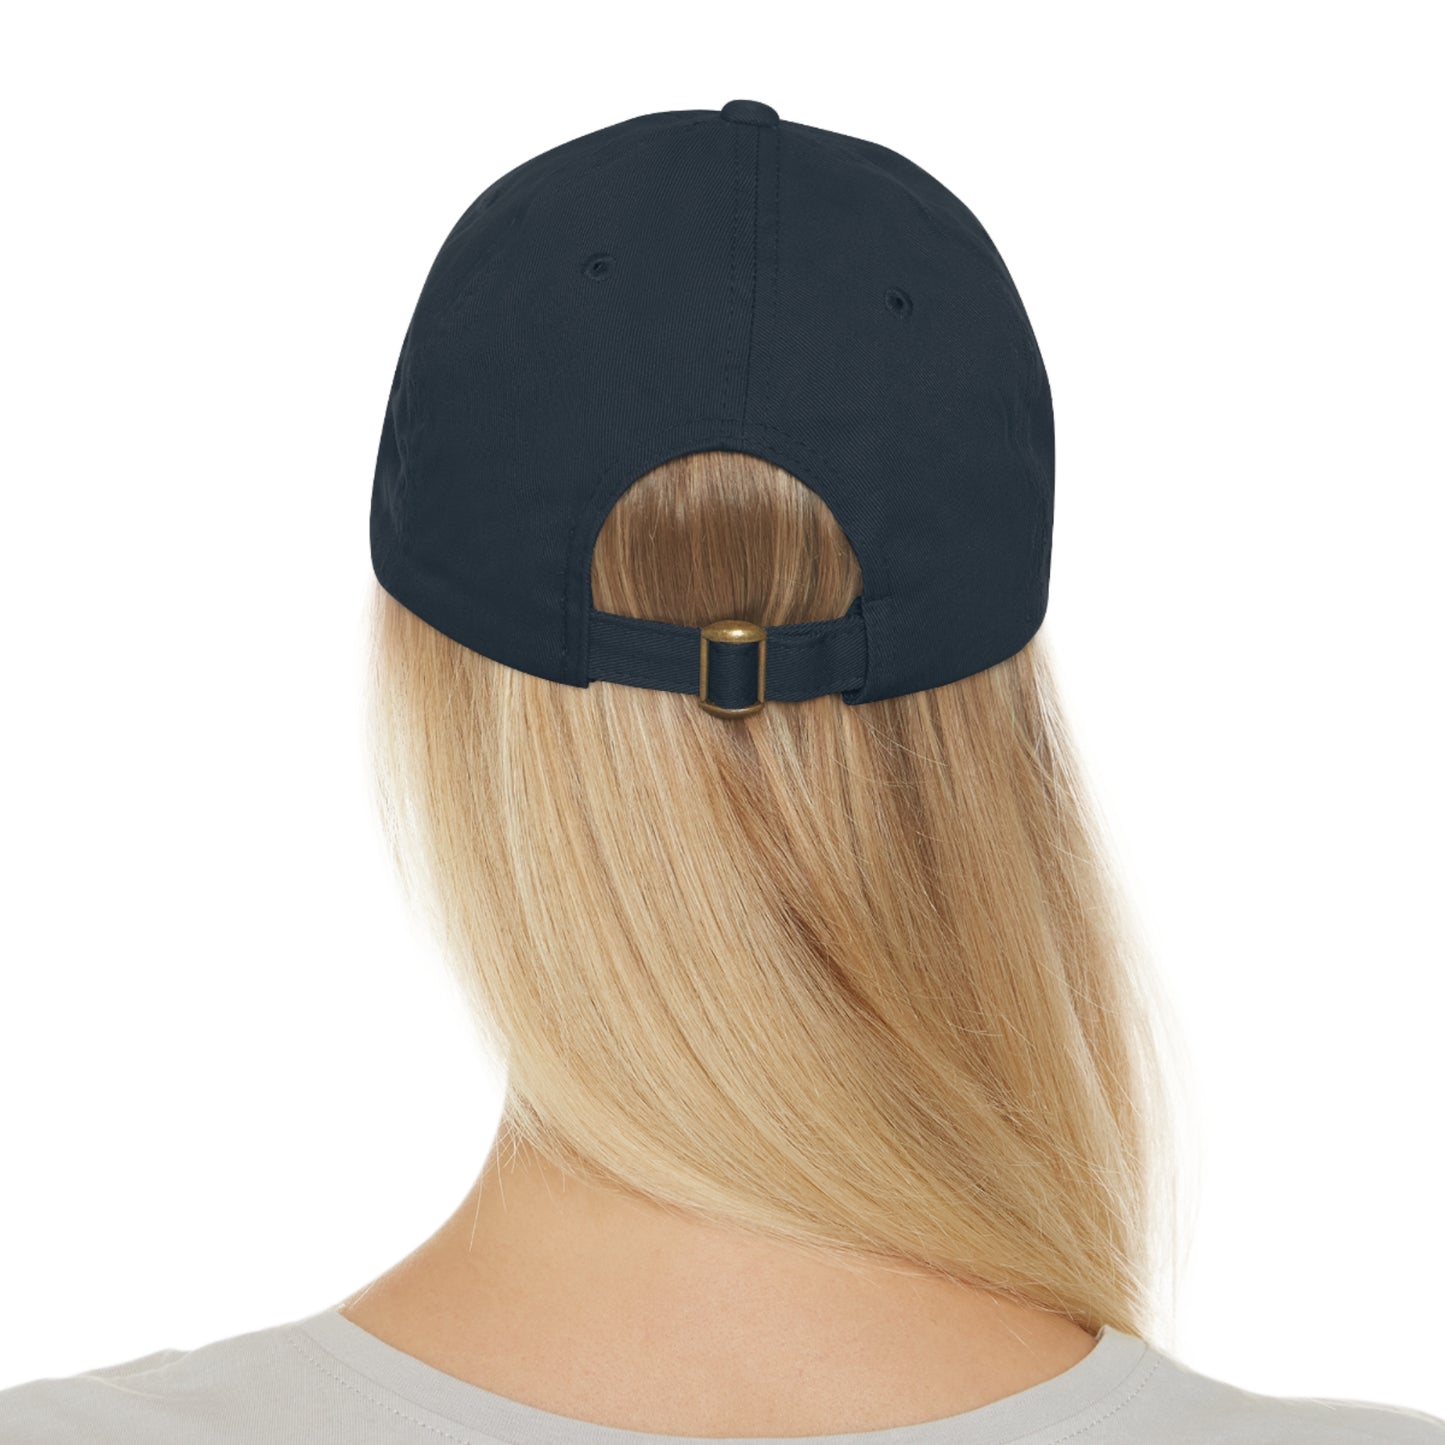 45 47 Hat w/ Leather Patch (Round)